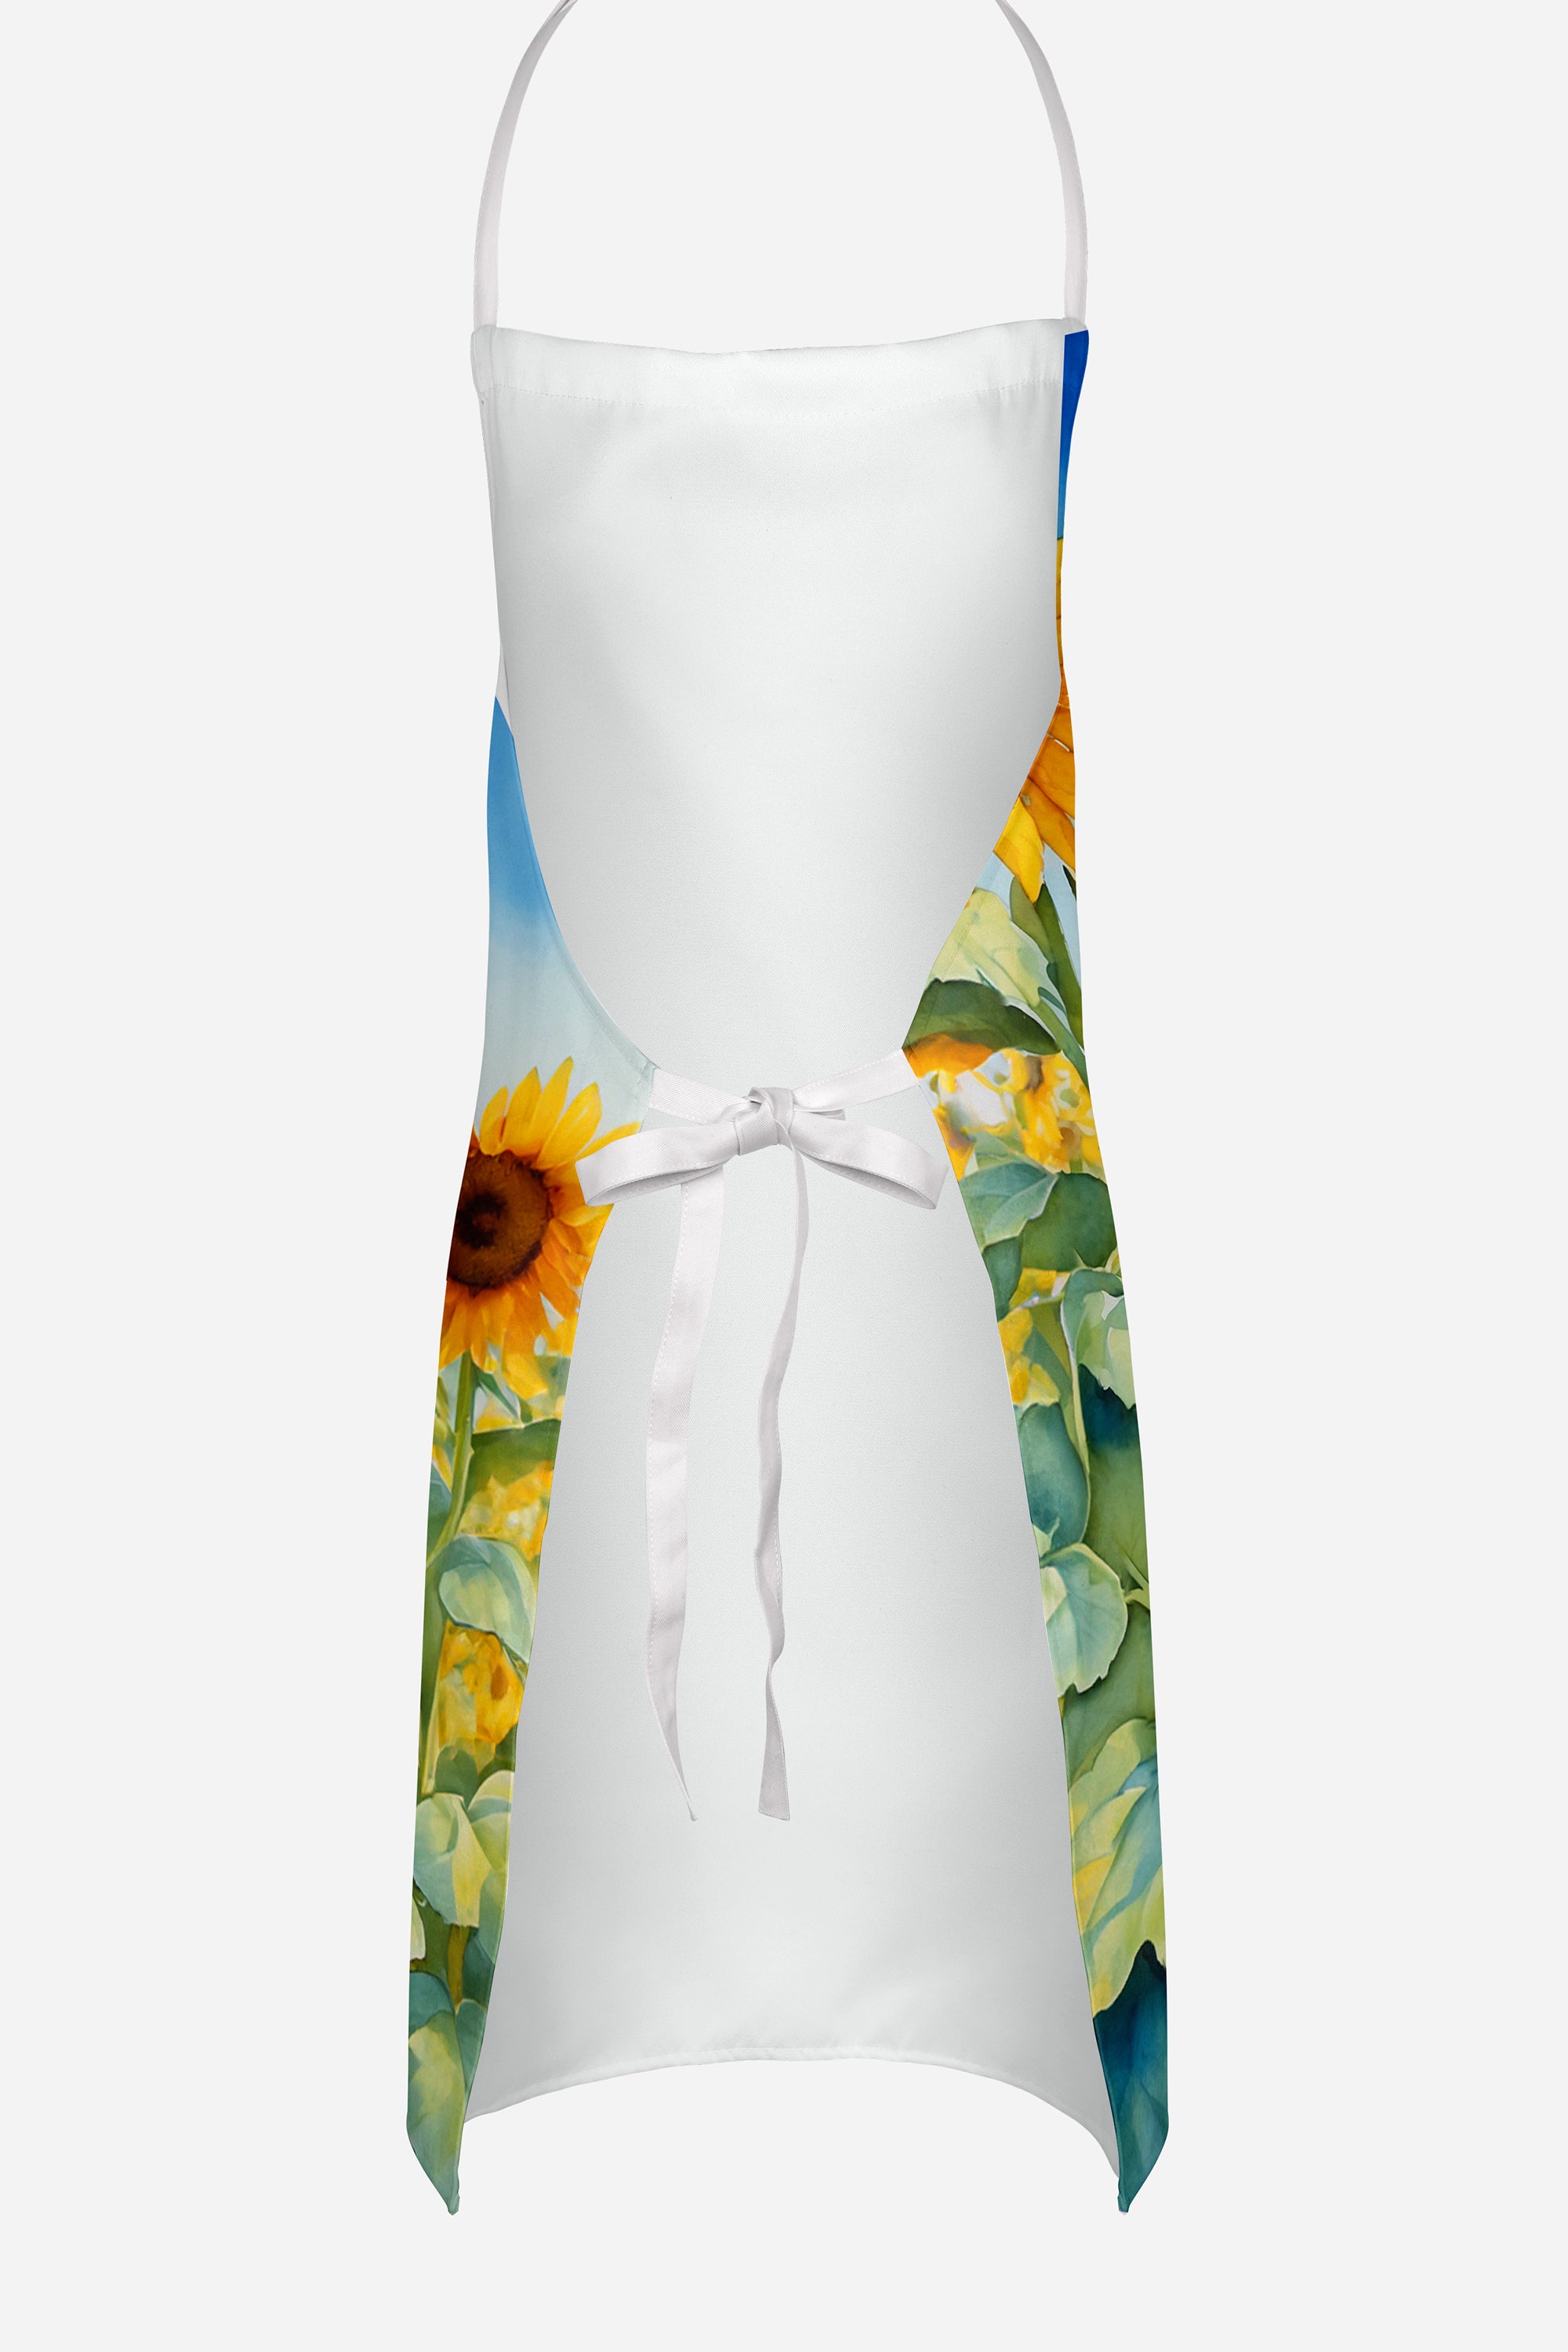 Catahoula in Sunflowers Apron